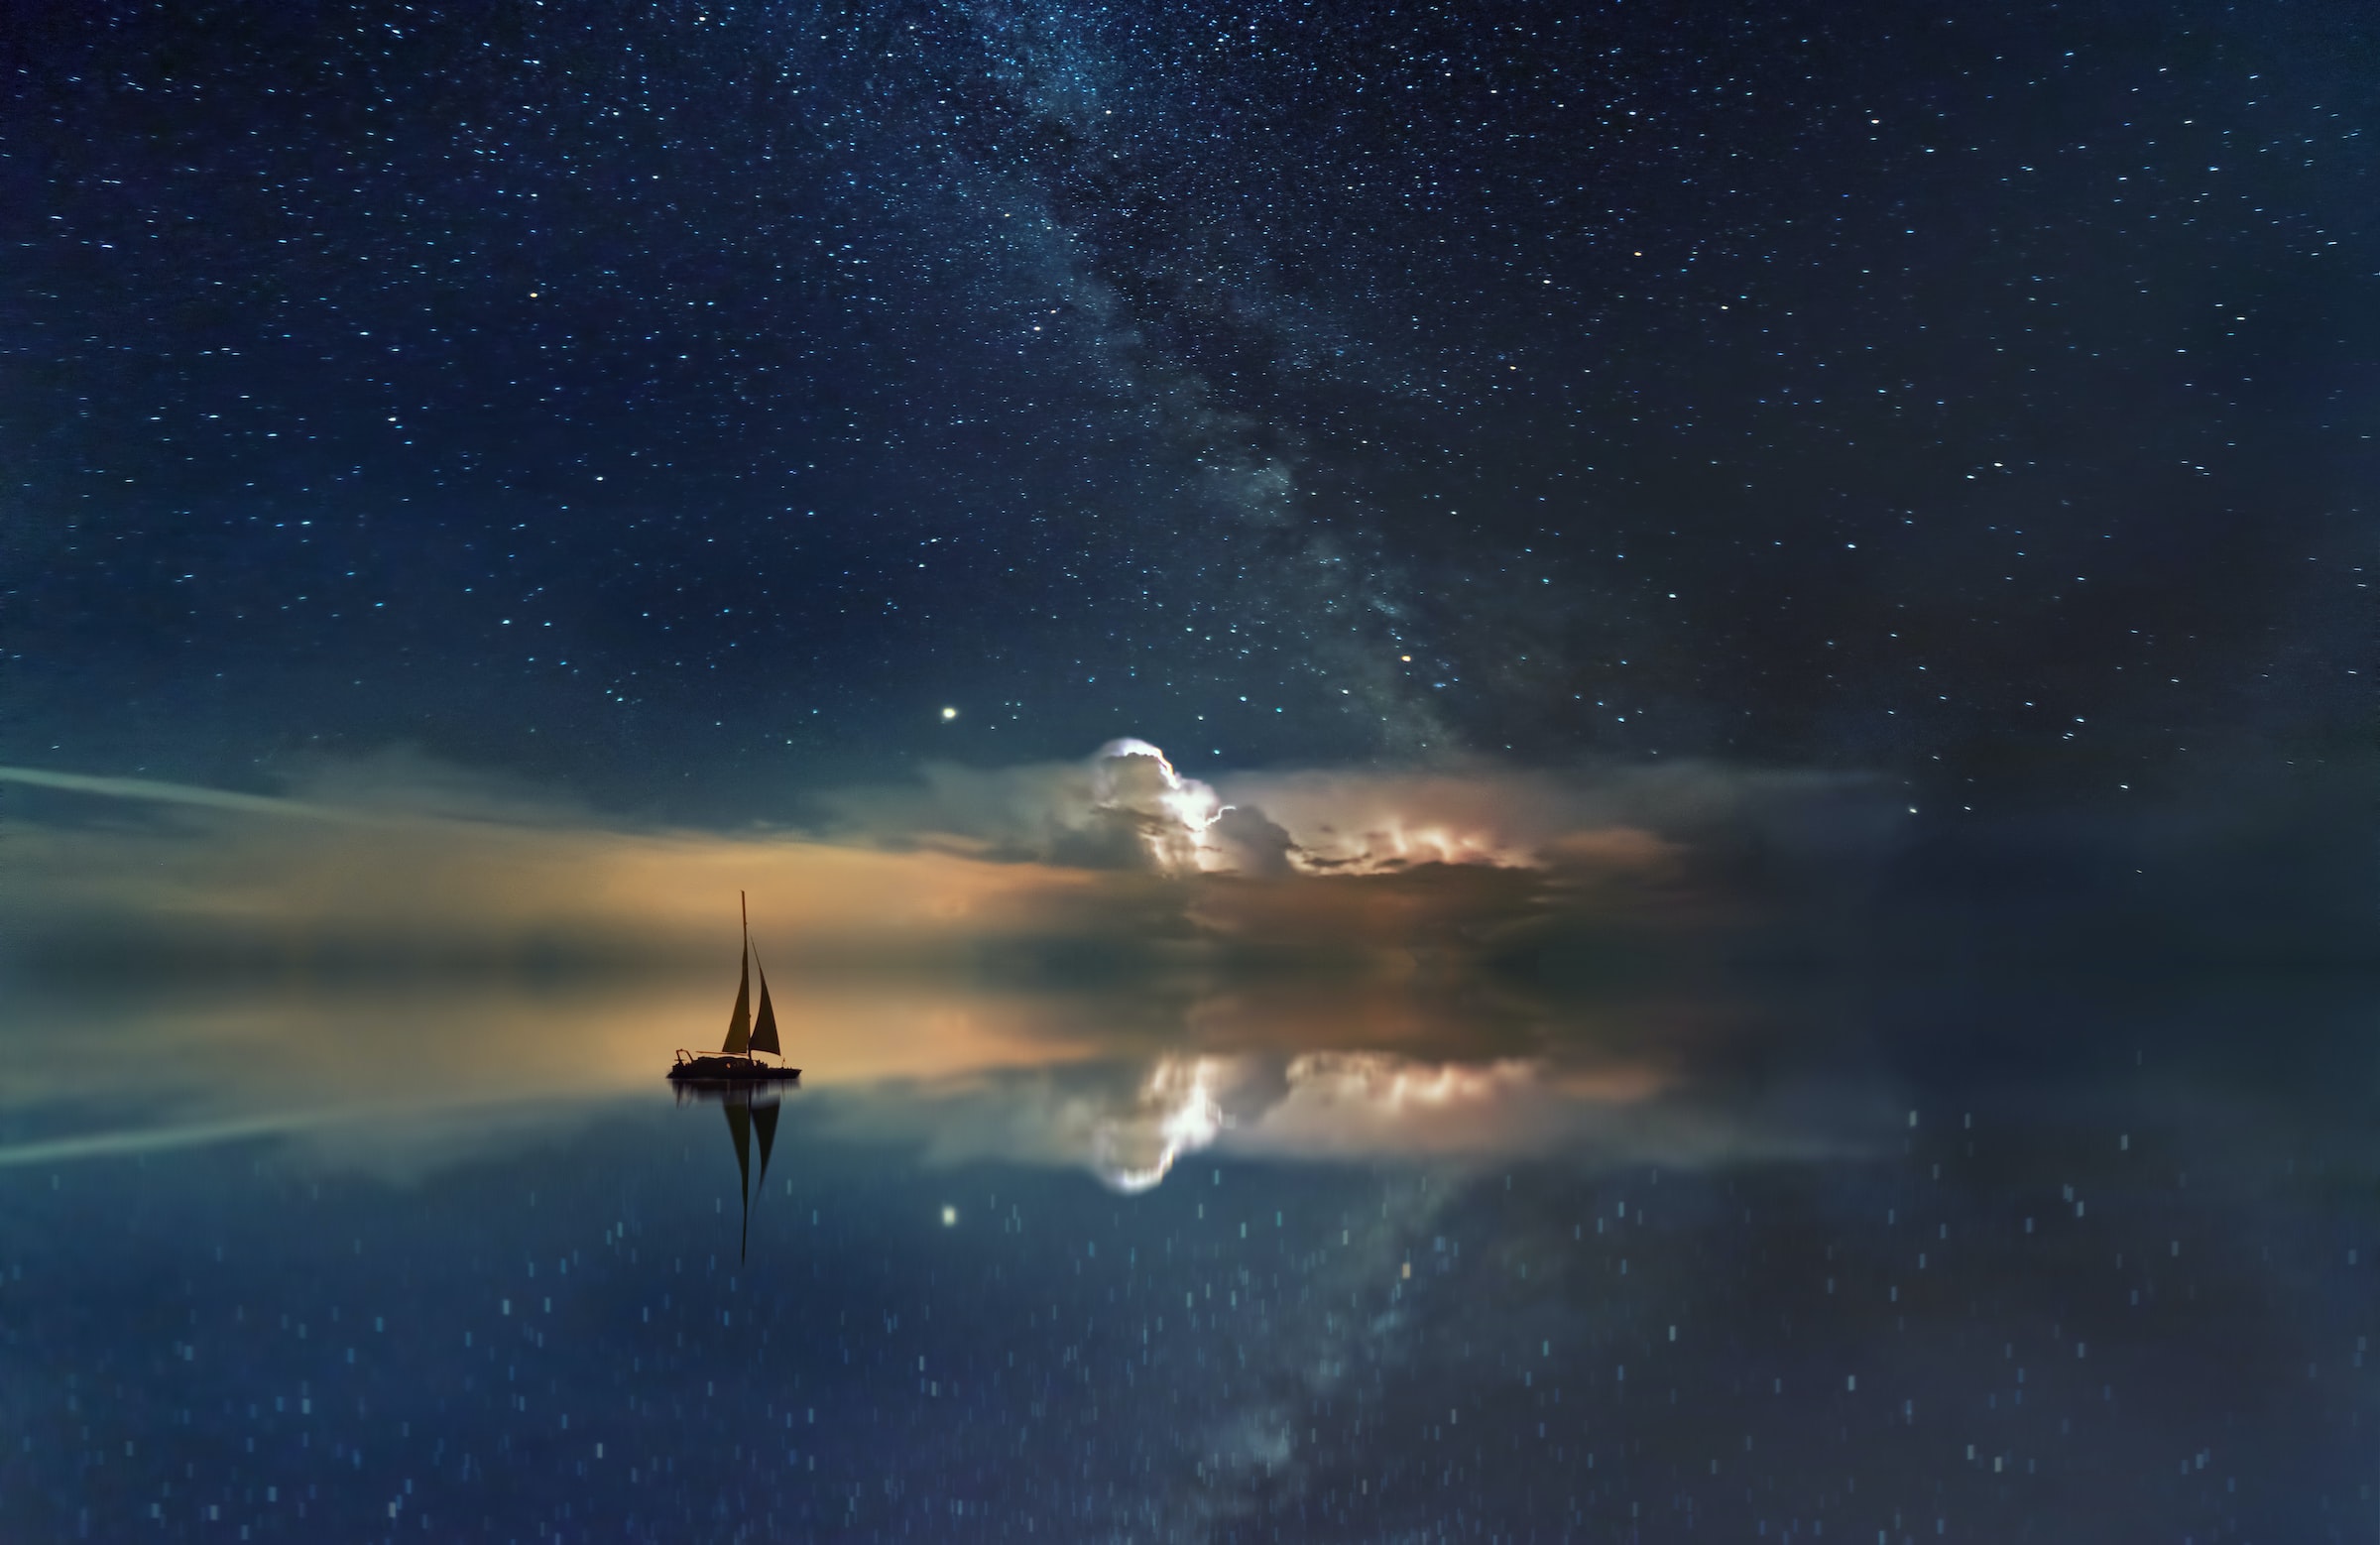 A night sky over water with a sailboat